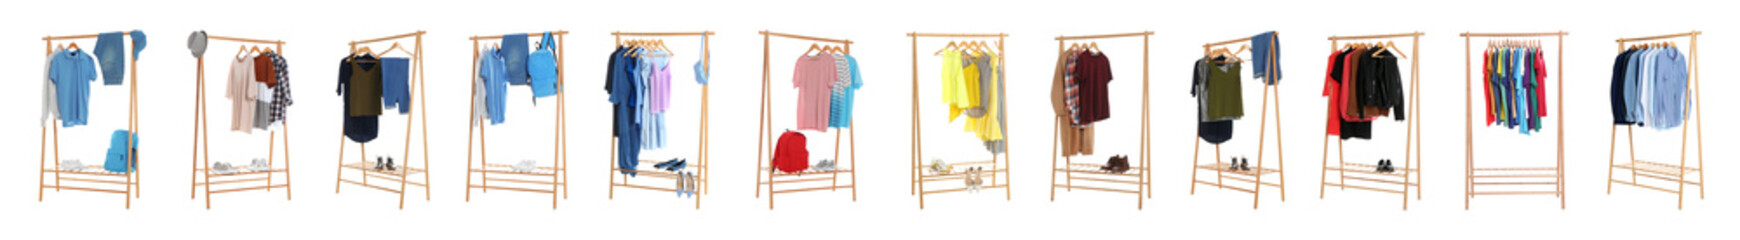 Wall Mural - Set of wardrobe racks with different clothes on white background. Banner design